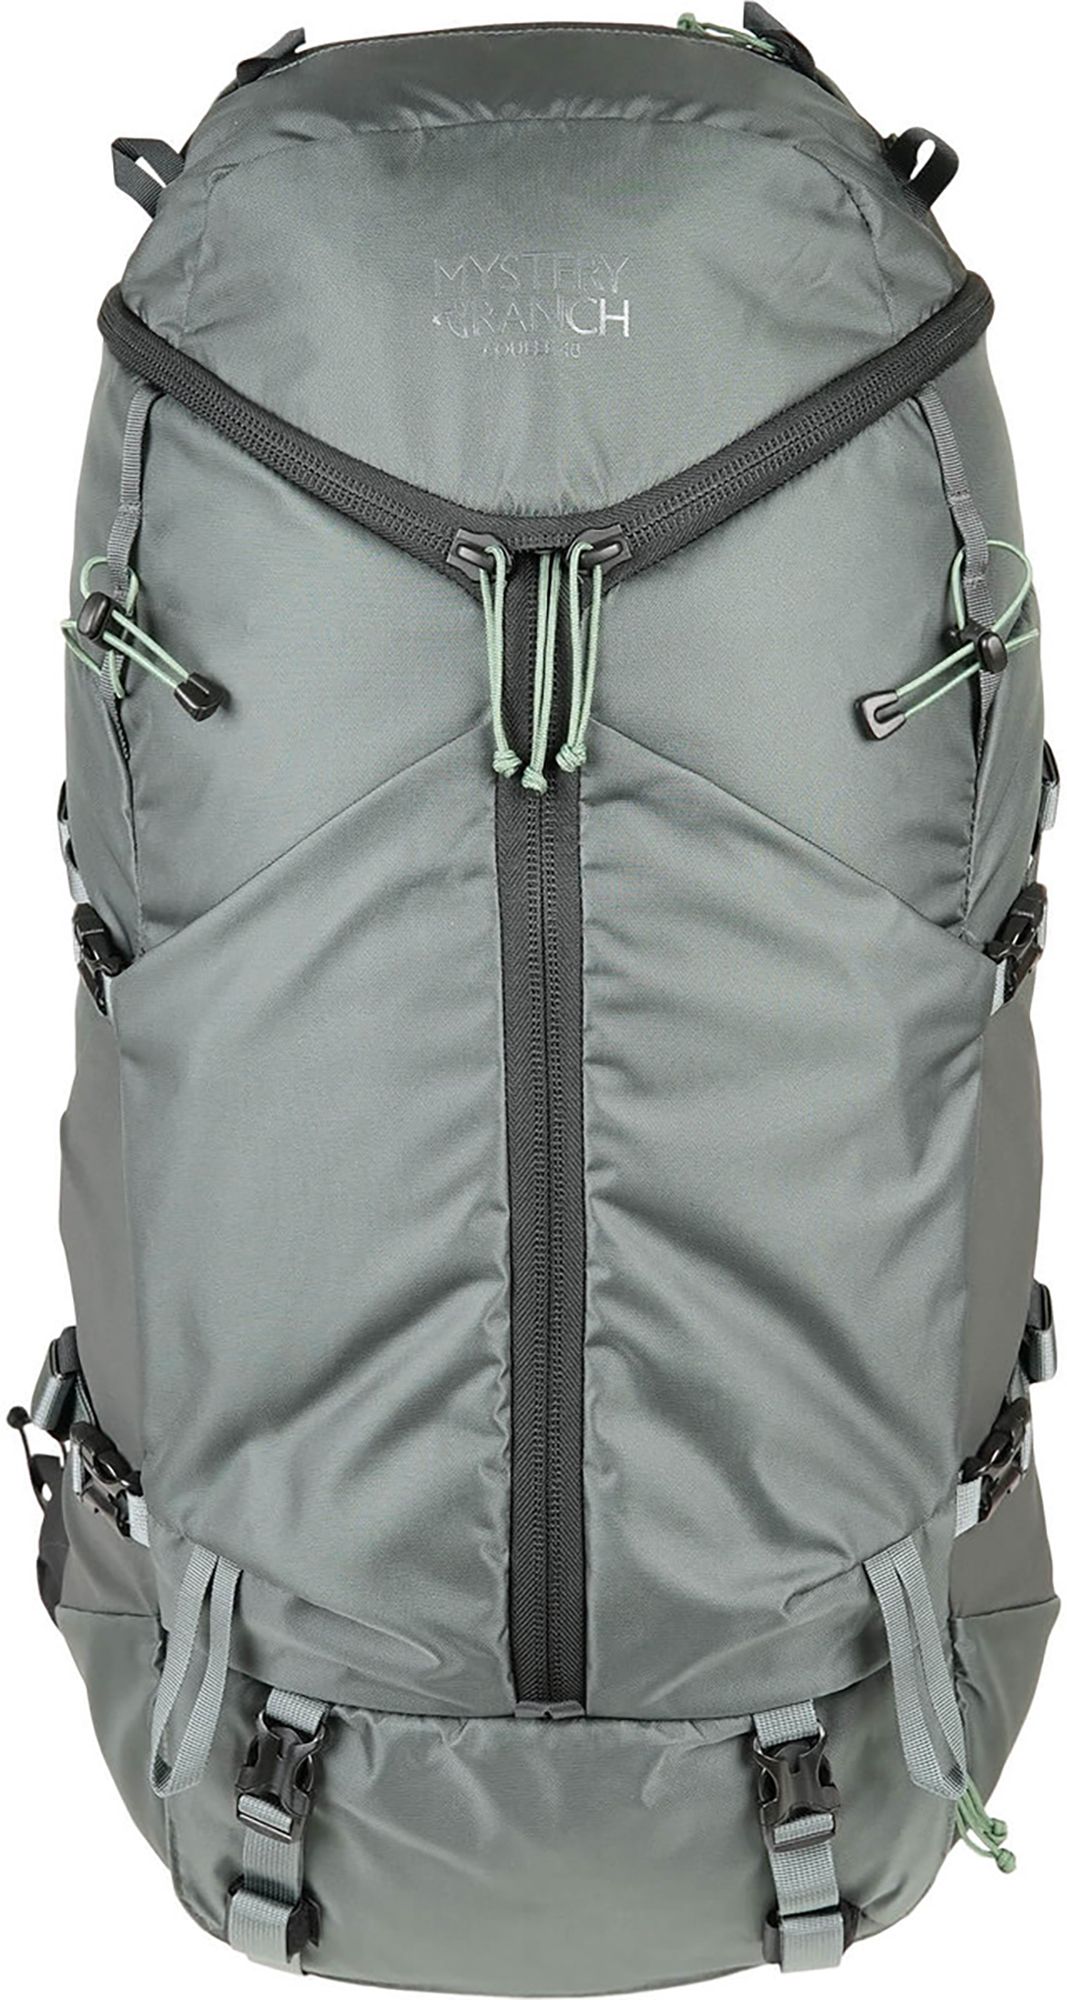 Photos - Knife / Multitool Mystery Ranch Men's Coulee 40 Backpack, XL, Mineral Grey 24ZZFMMCL40XXXXXX 